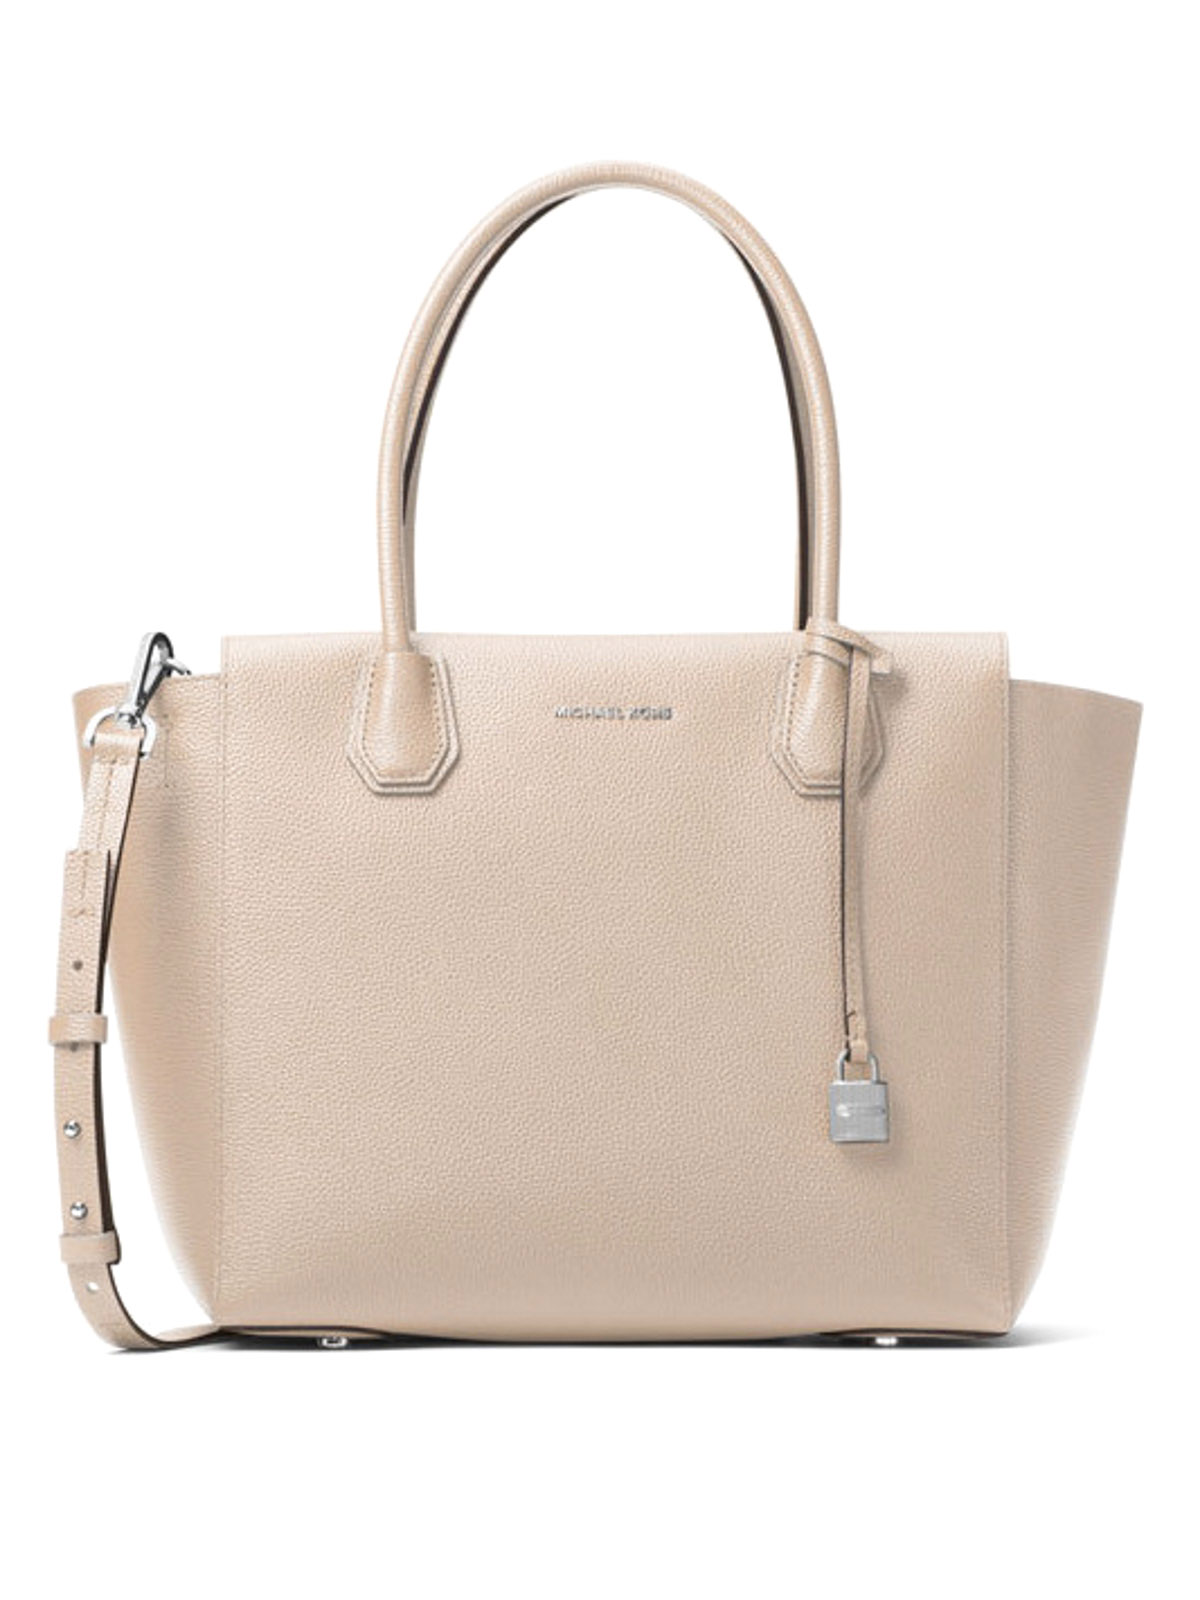 Mercer large tote by Michael Kors - totes bags | iKRIX